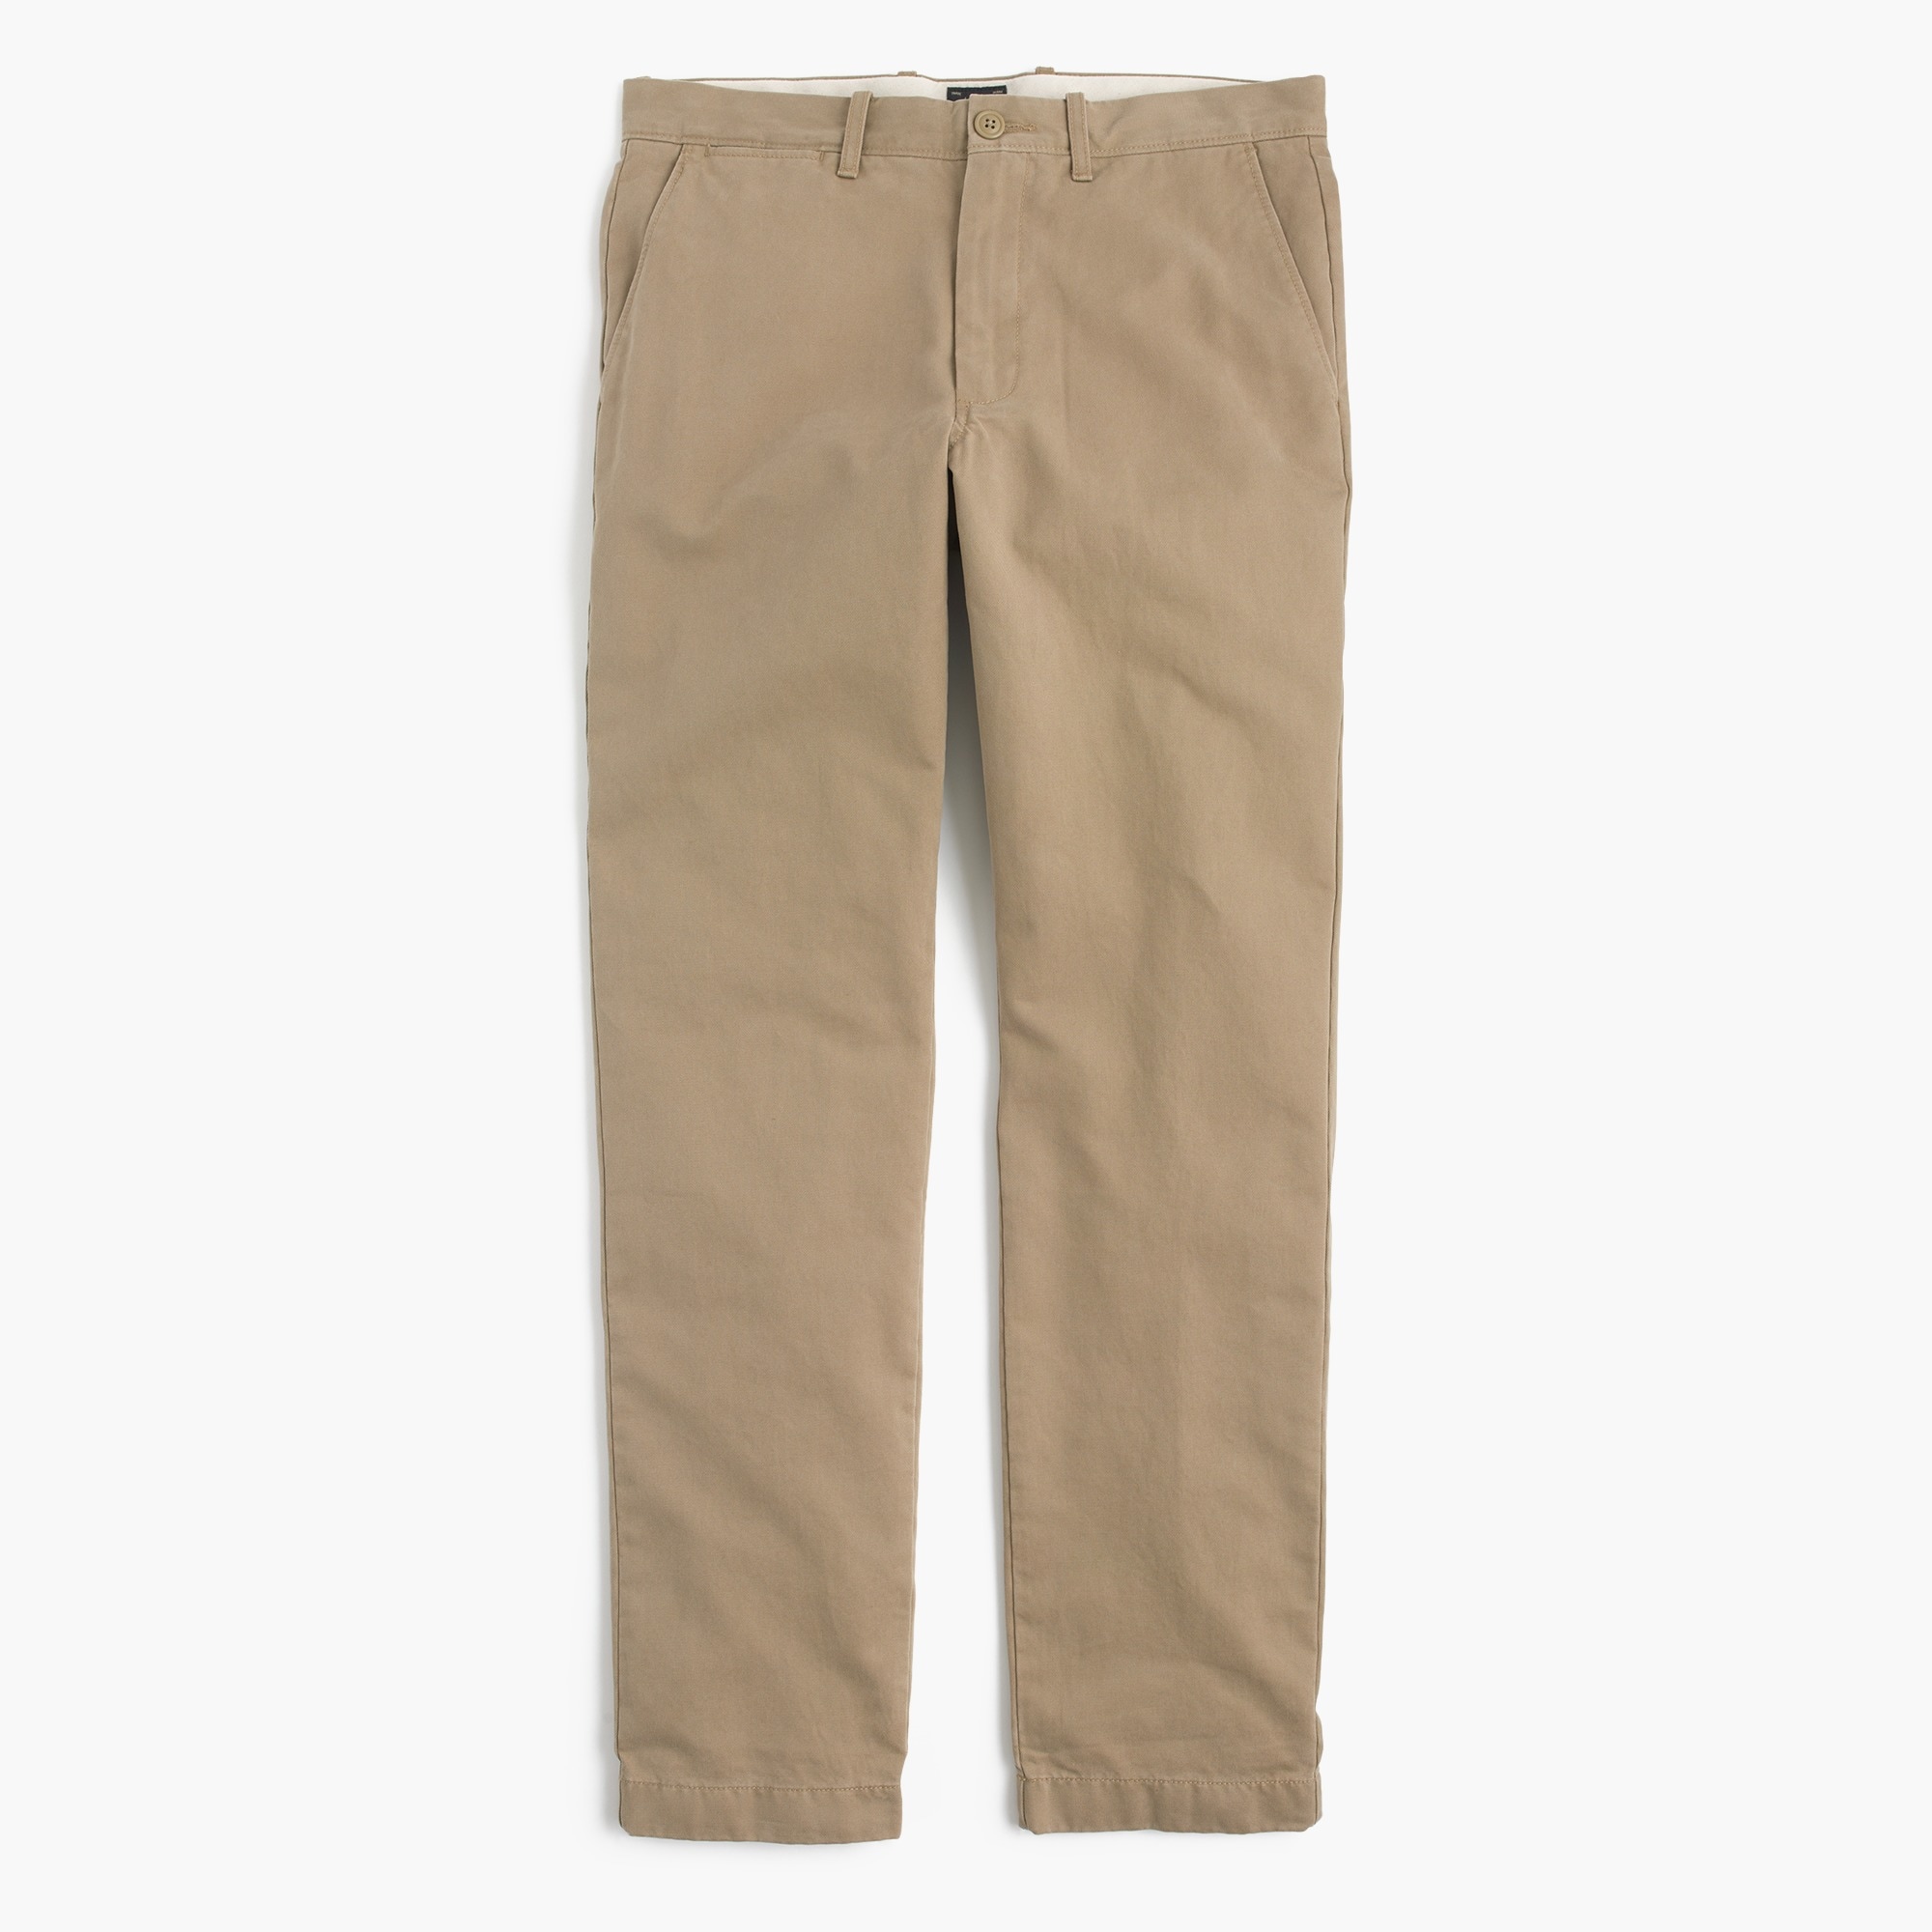 J.Crew: 1040 Athletic-fit Broken-in Chino Pant For Men